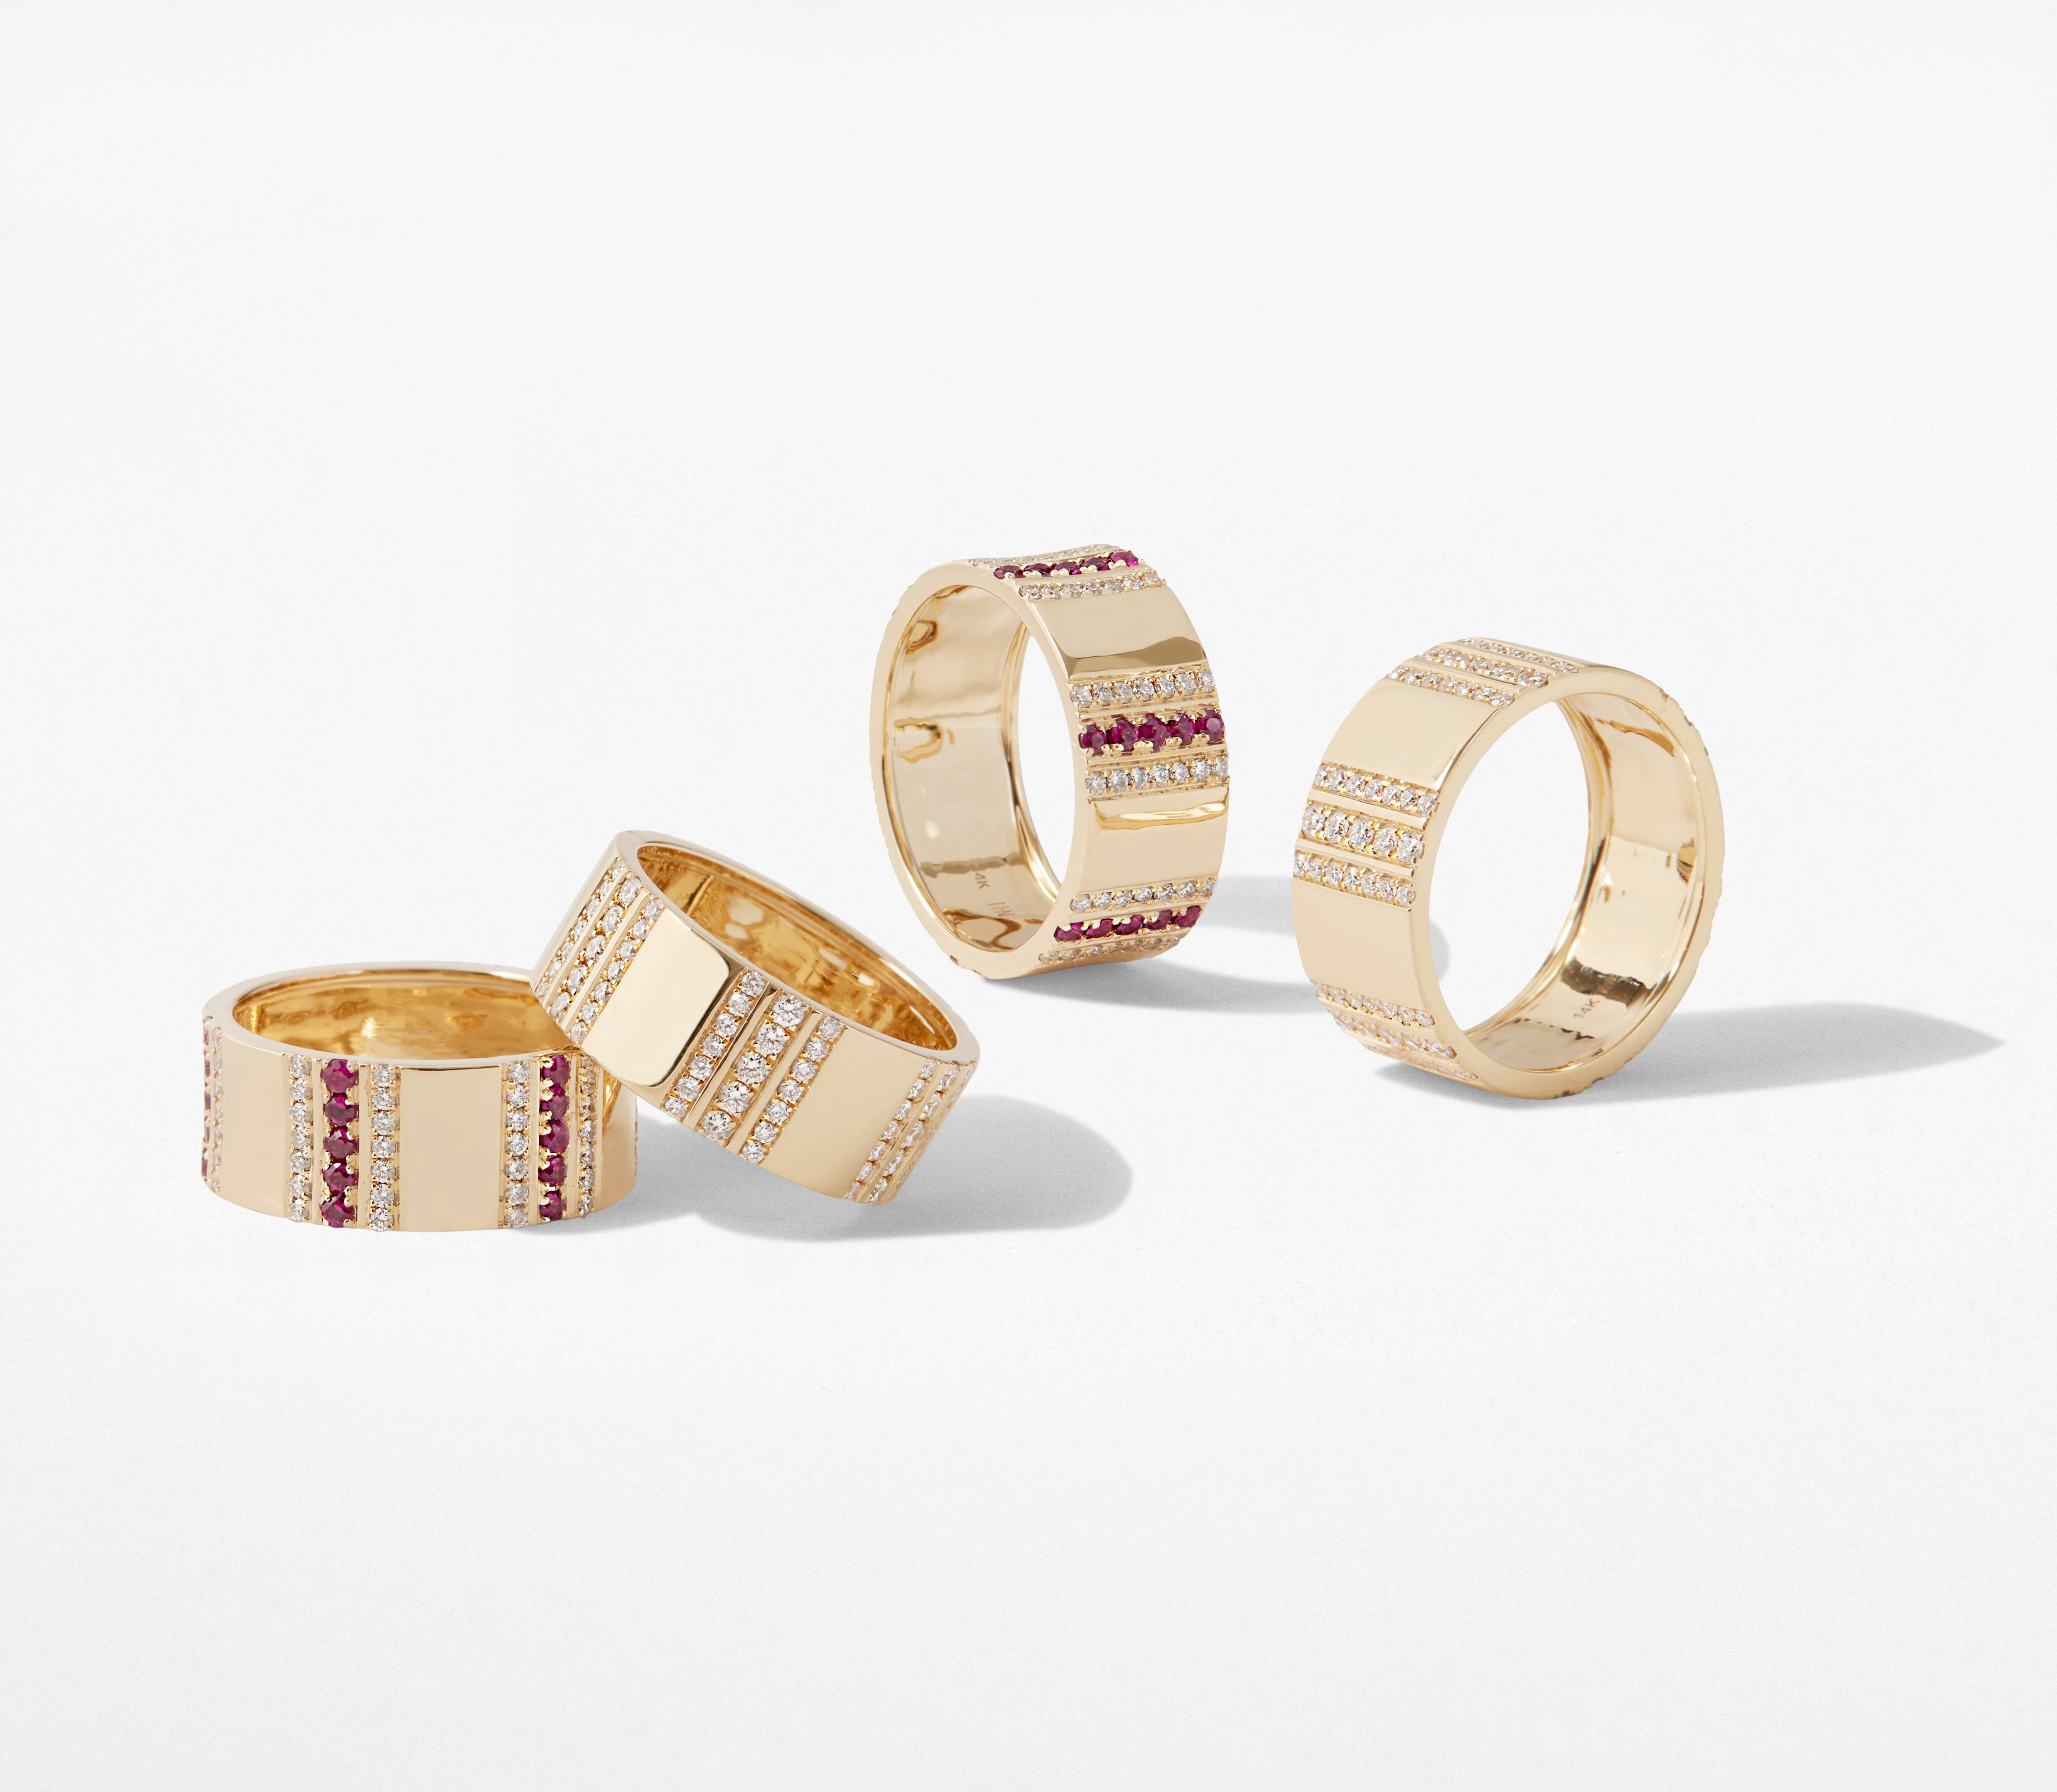 Highly polished 14k yellow gold with 114 hand-set Brilliant Cut diamonds and Rubies set in a pinstripe pattern define this bold and glamorous ring. With its bold and sturdy feel, this collection symbolizes strength and power. This stackable ring